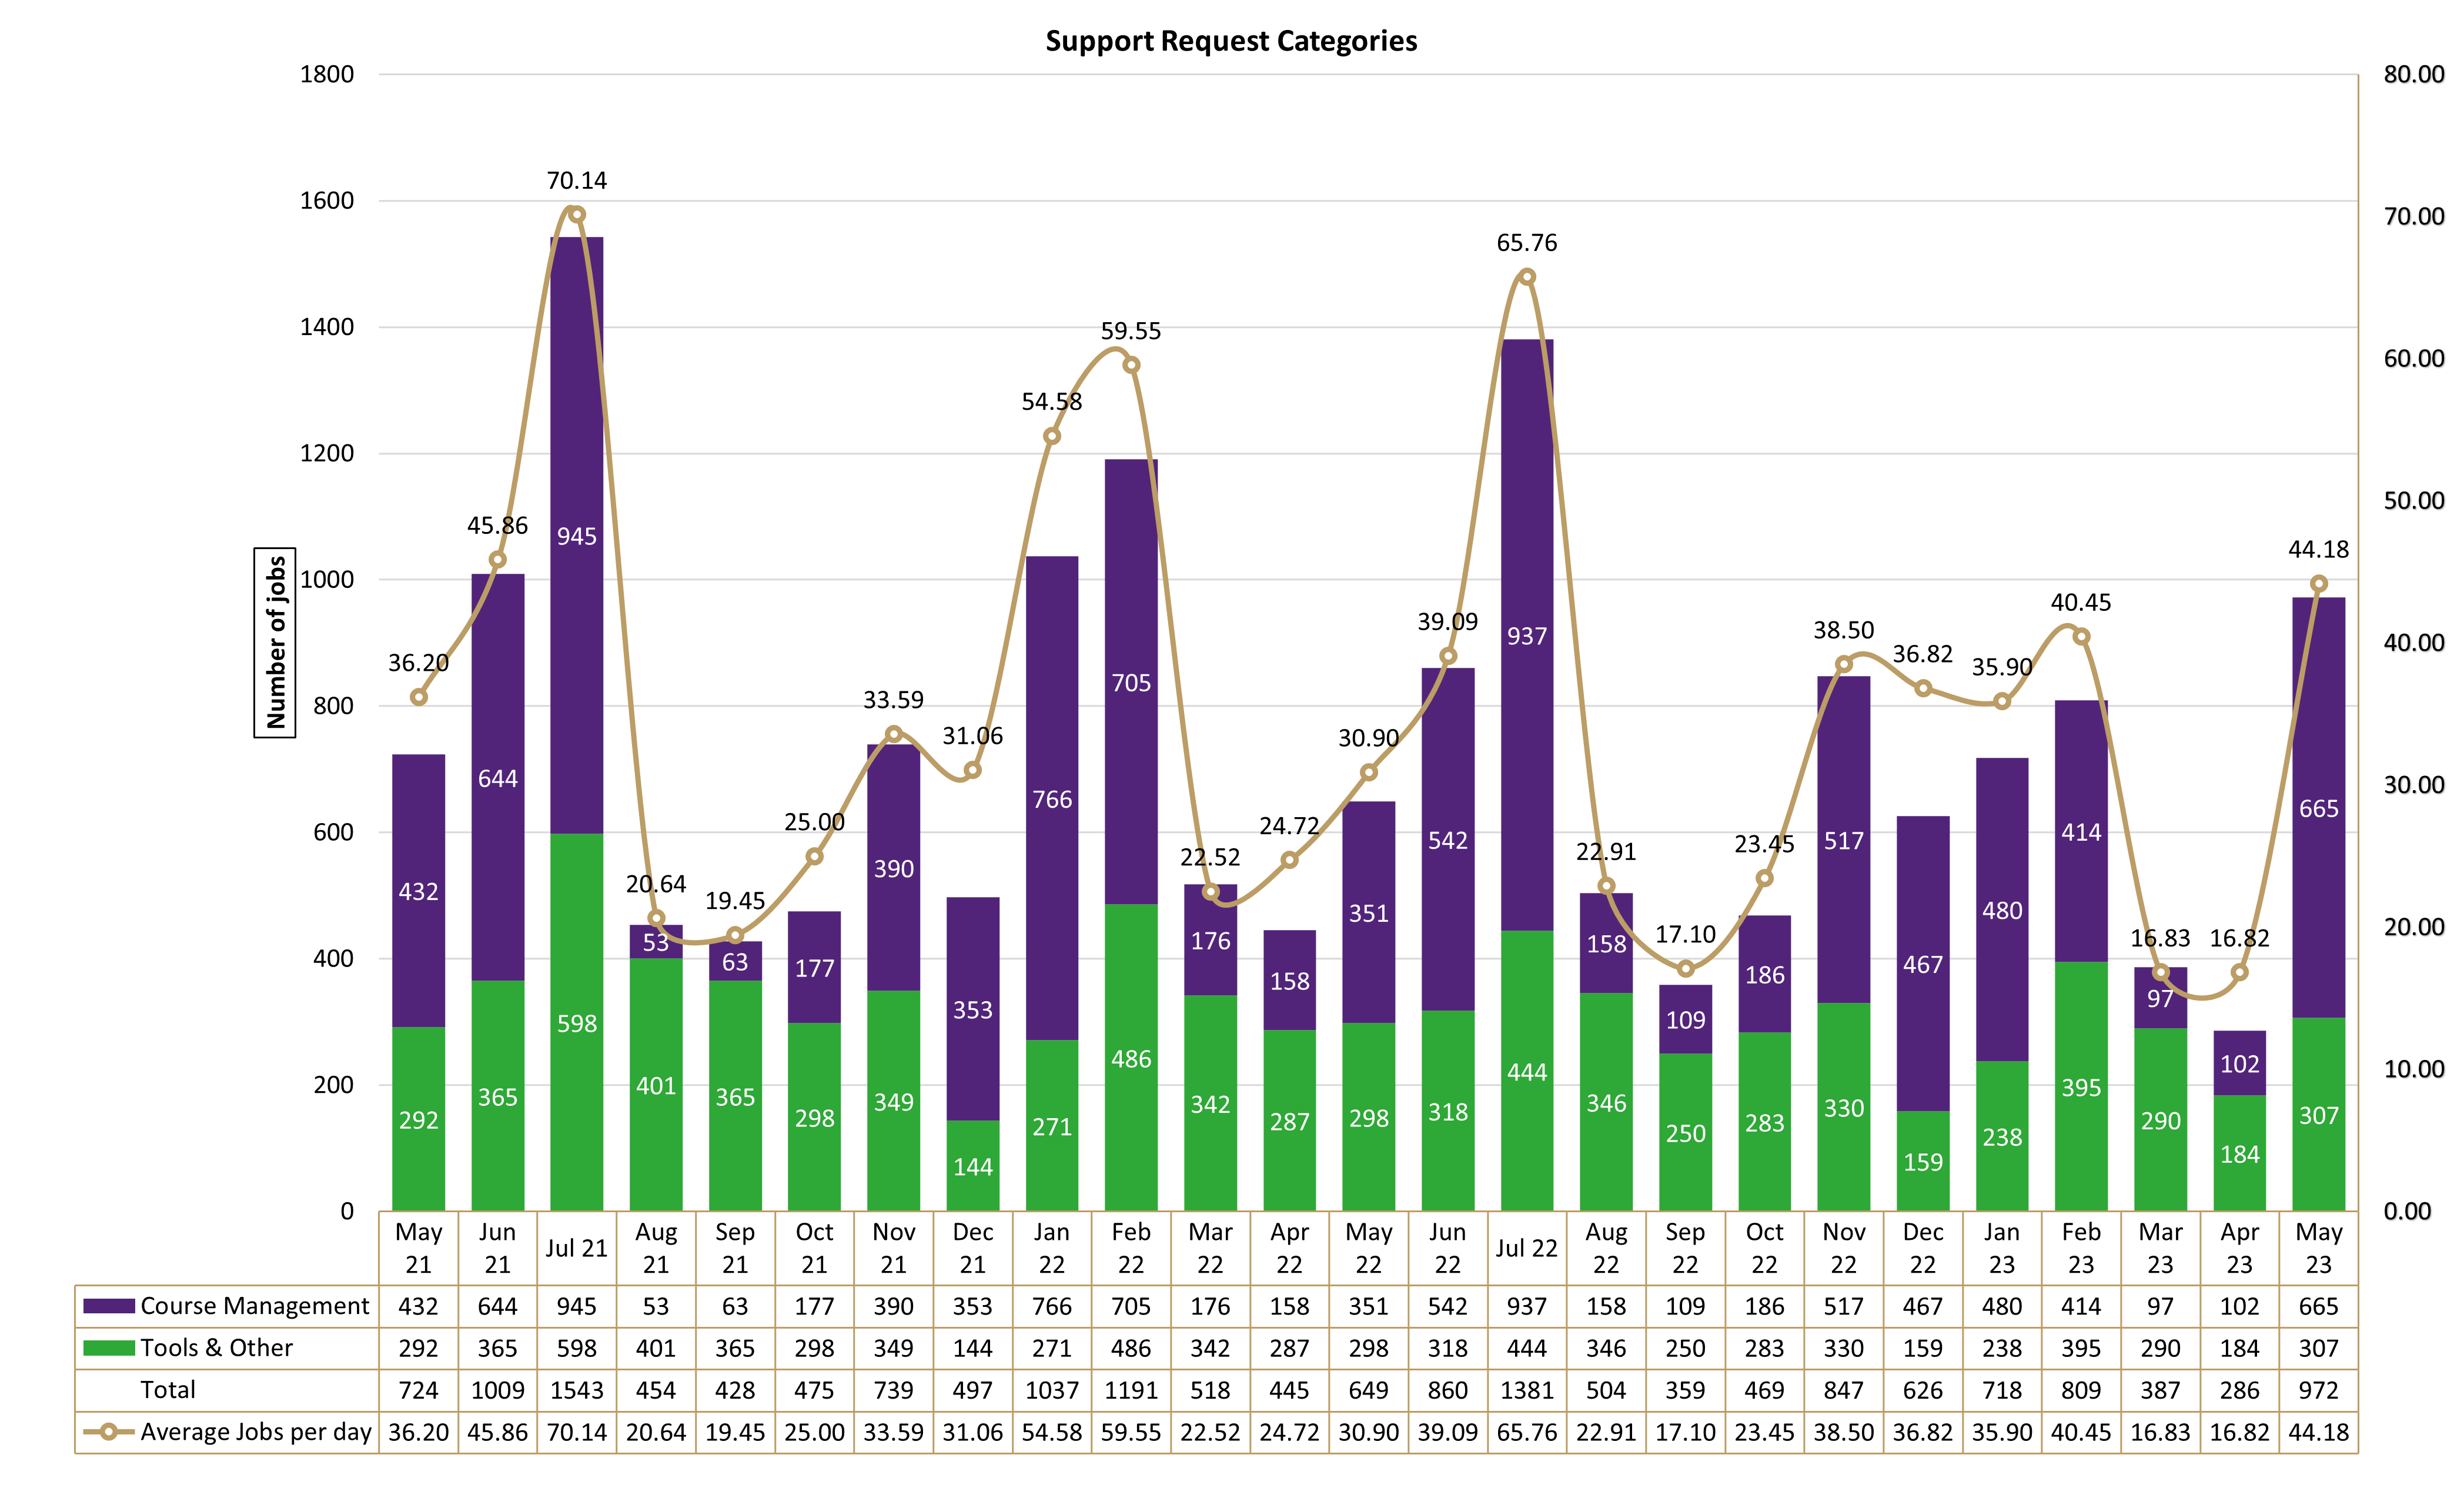 Chart of Support Request Categories from May 2021 to May 2023